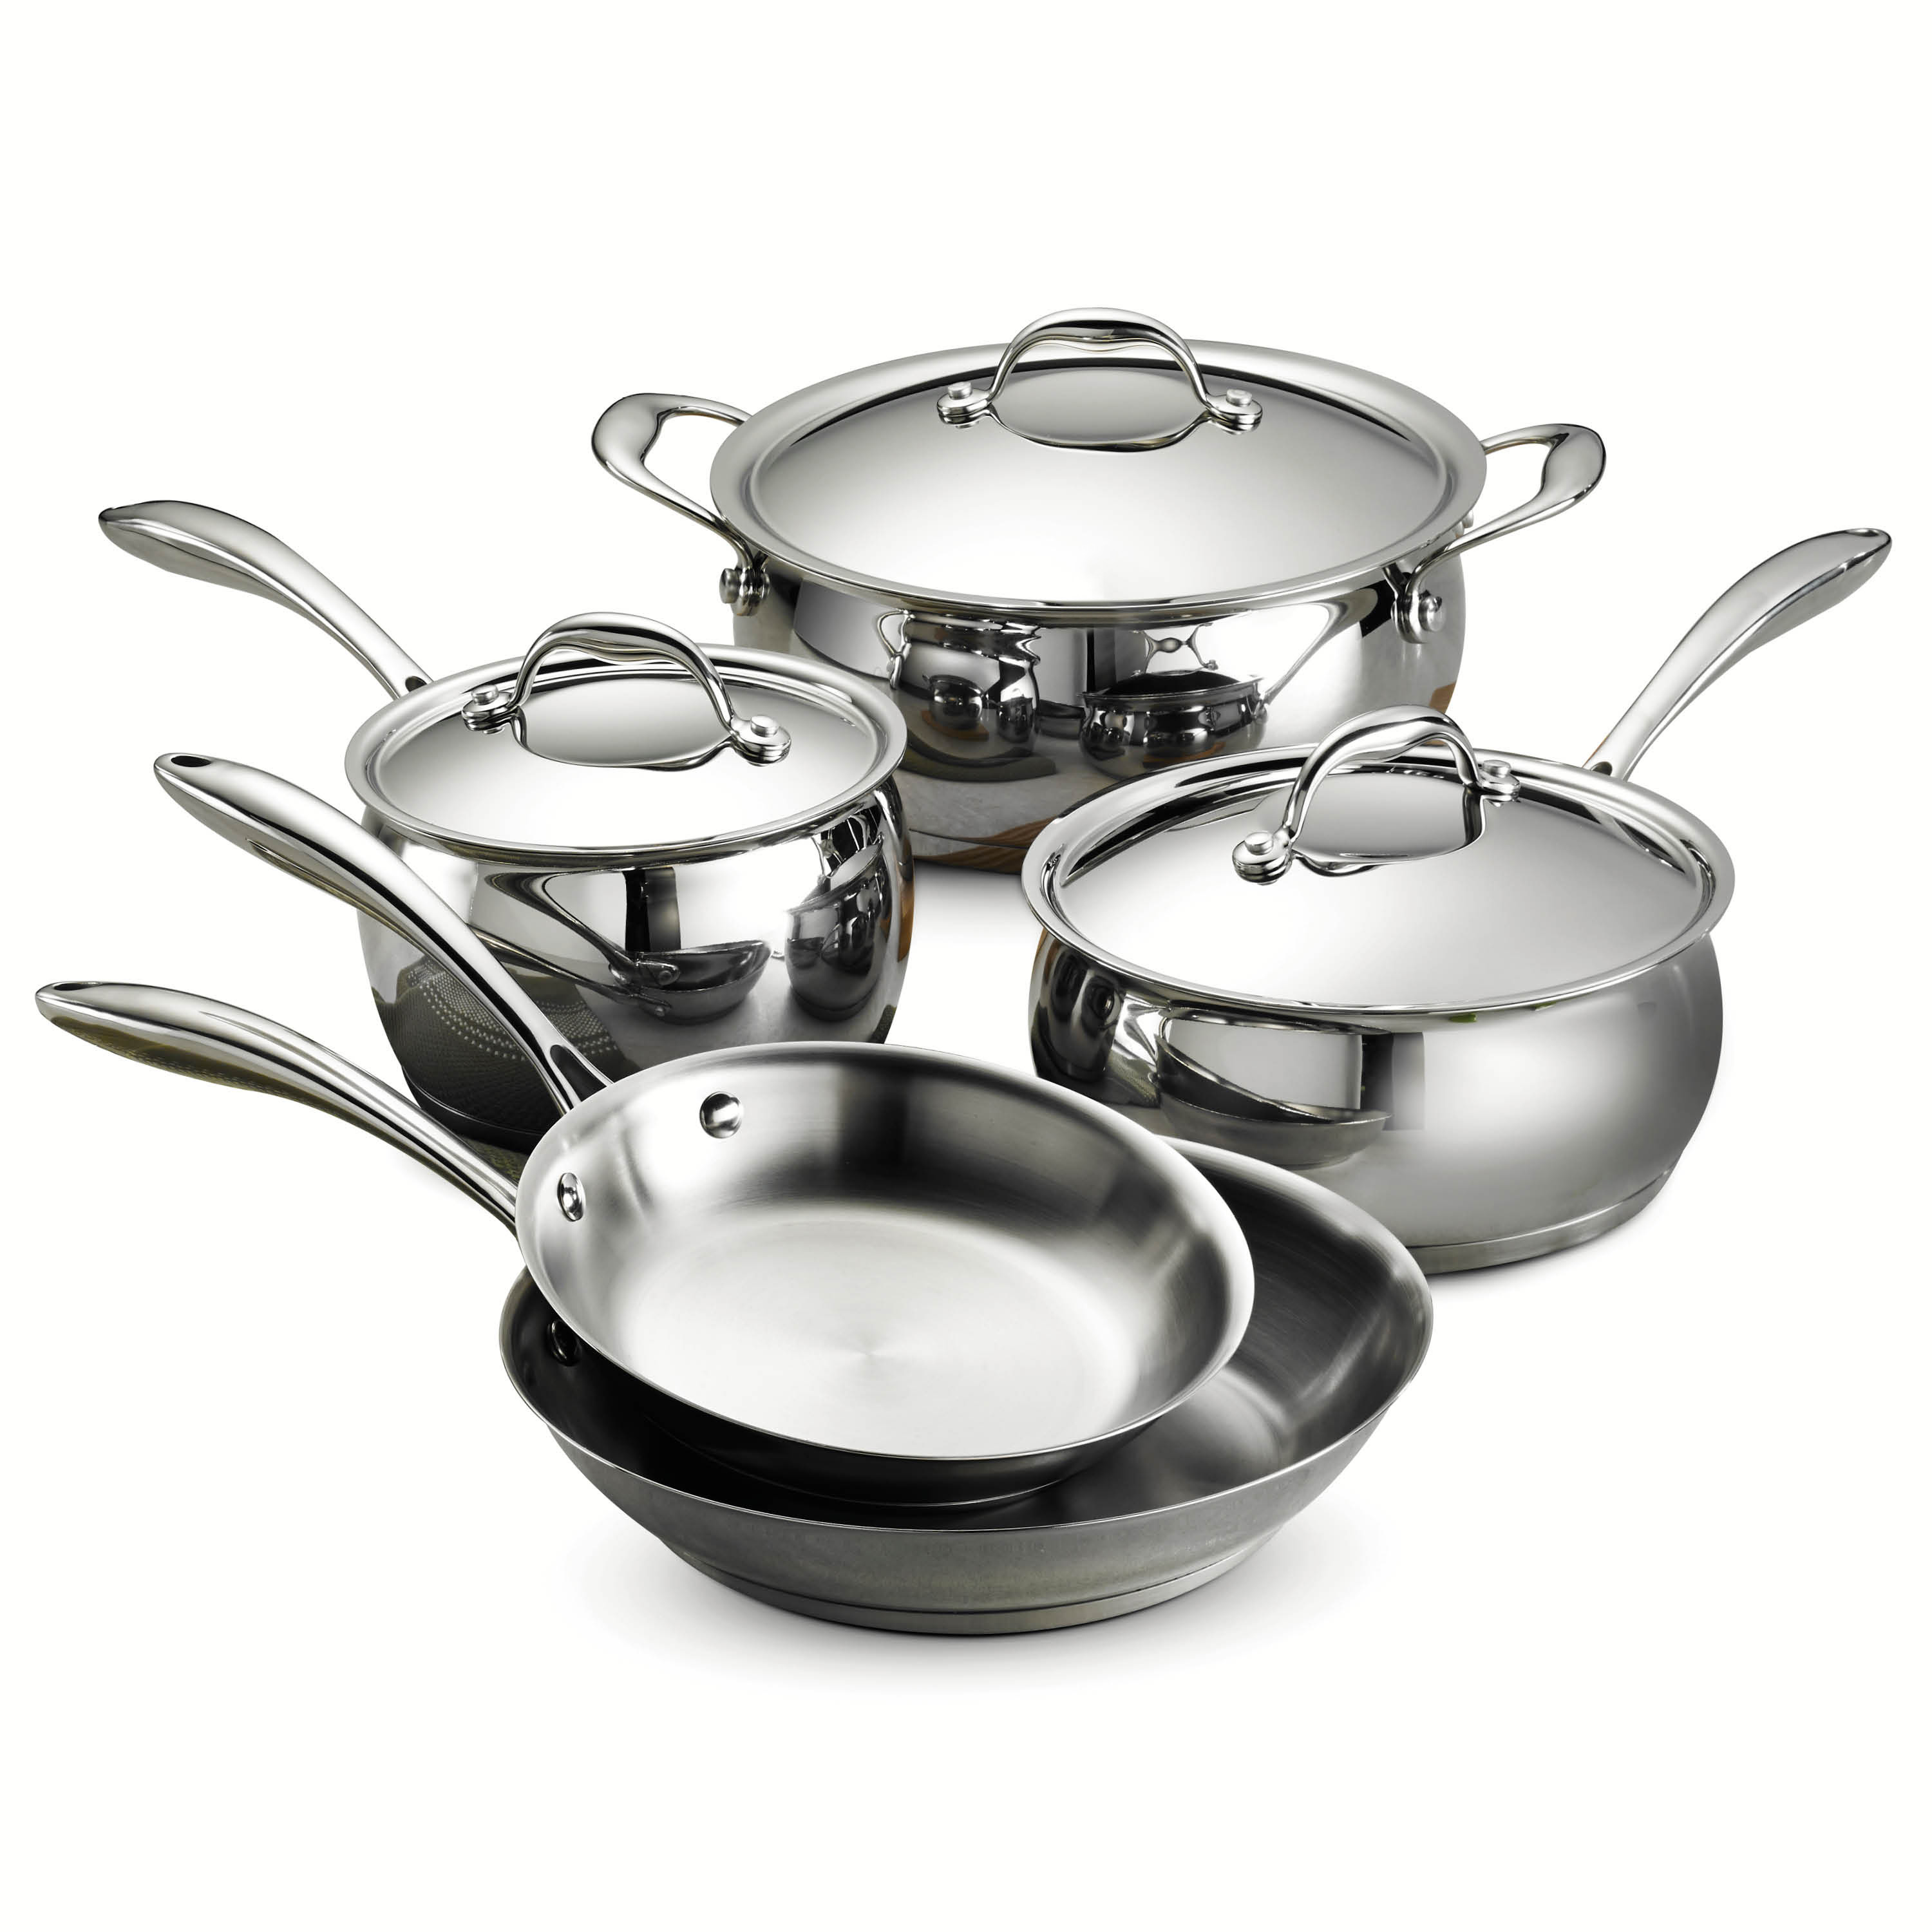 New Tramontina Domus Tri-Ply Base Stainless Steel 8-Piece Cookware Set -  Kitchenware News & Housewares ReviewKitchenware News & Housewares Review